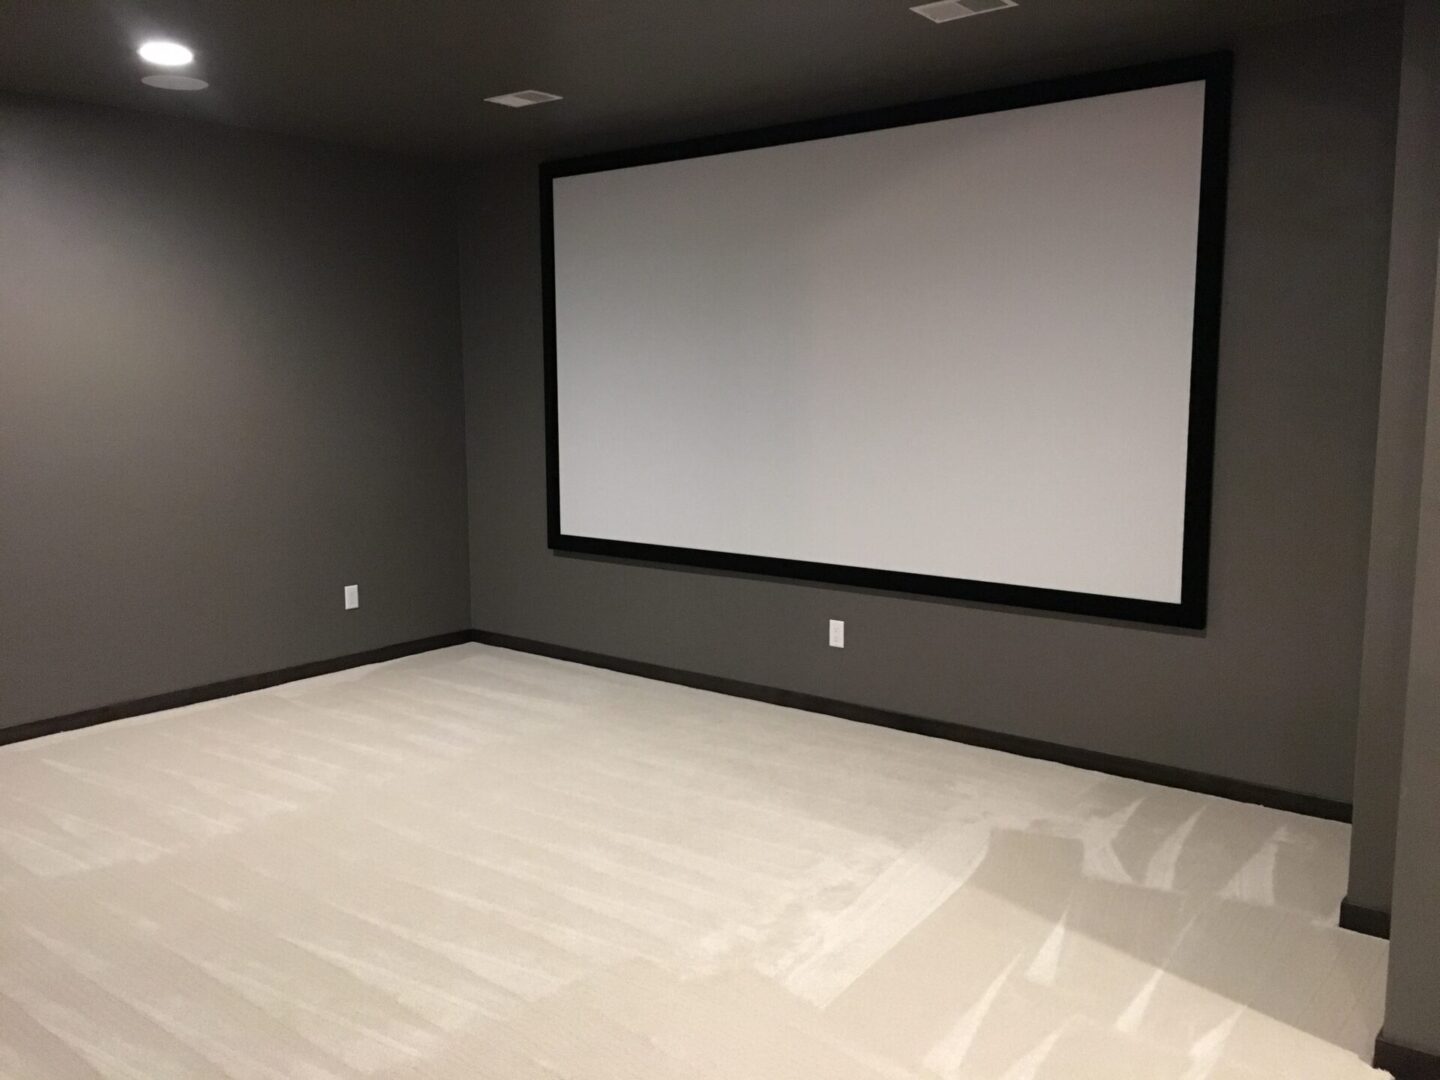 Large screen inside a home theater